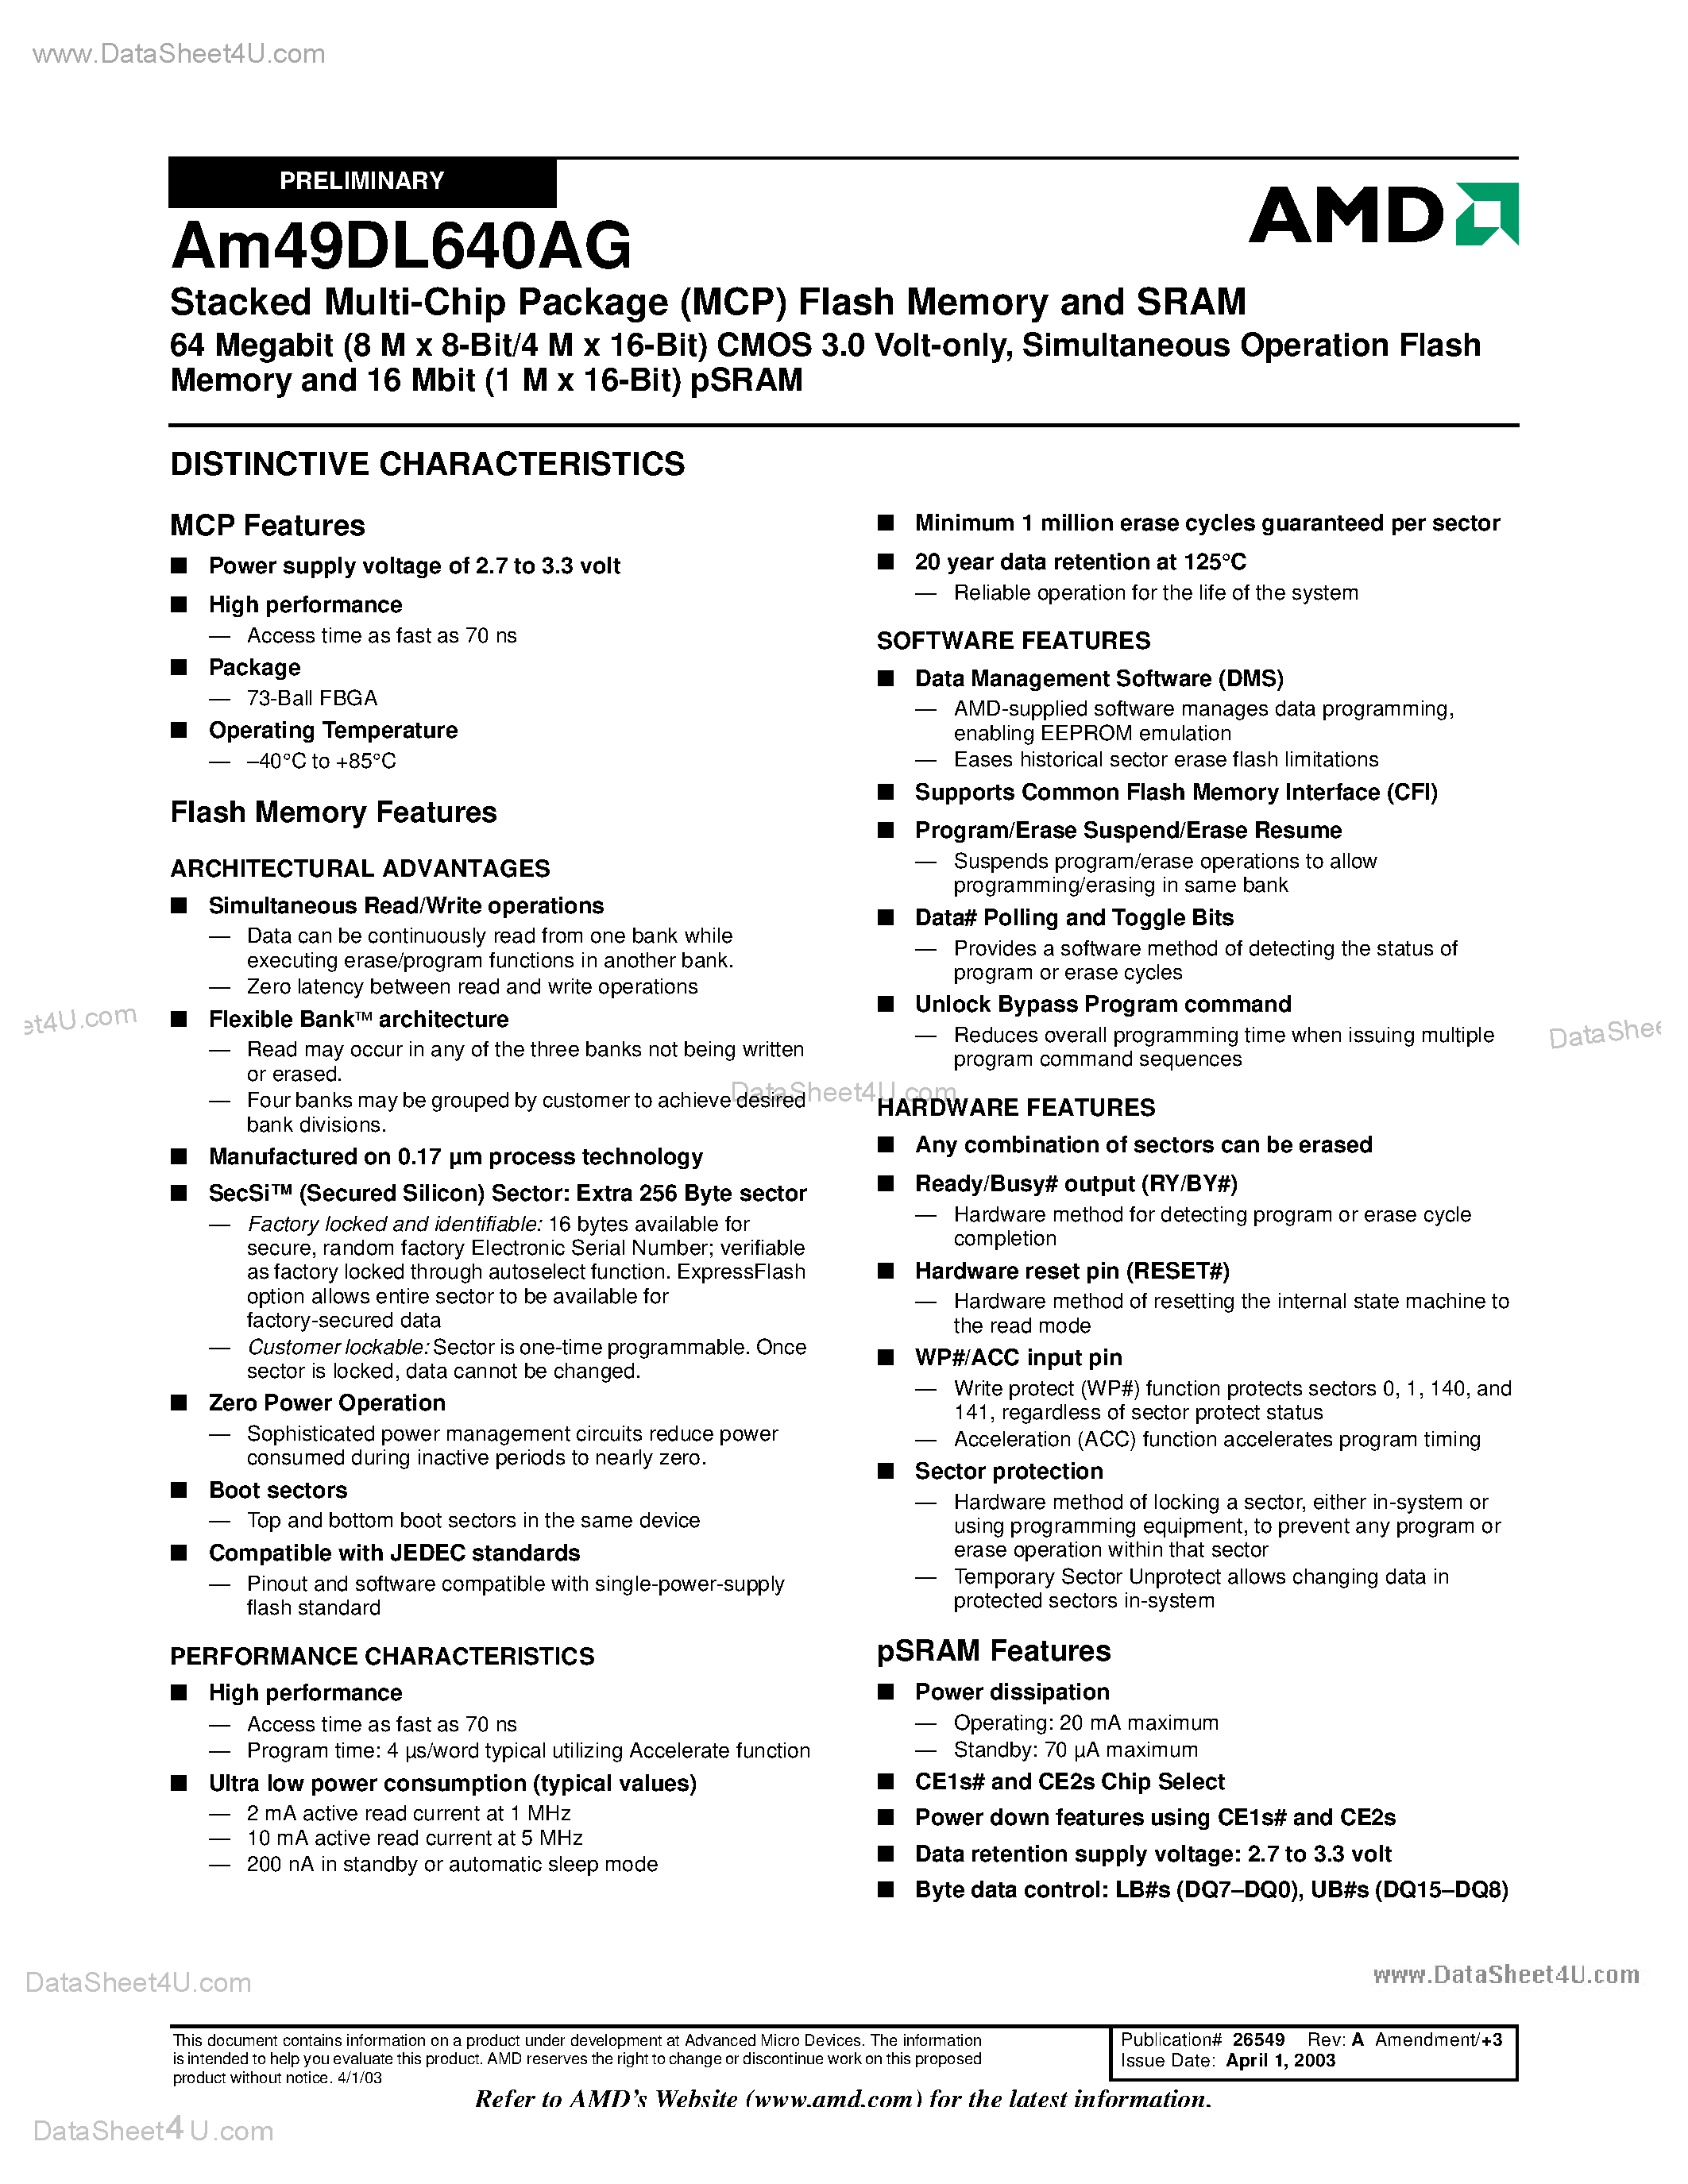 Datasheet AM49DL640AG - Stacked Multi-Chip Package (MCP) Flash Memory and SRAM page 2